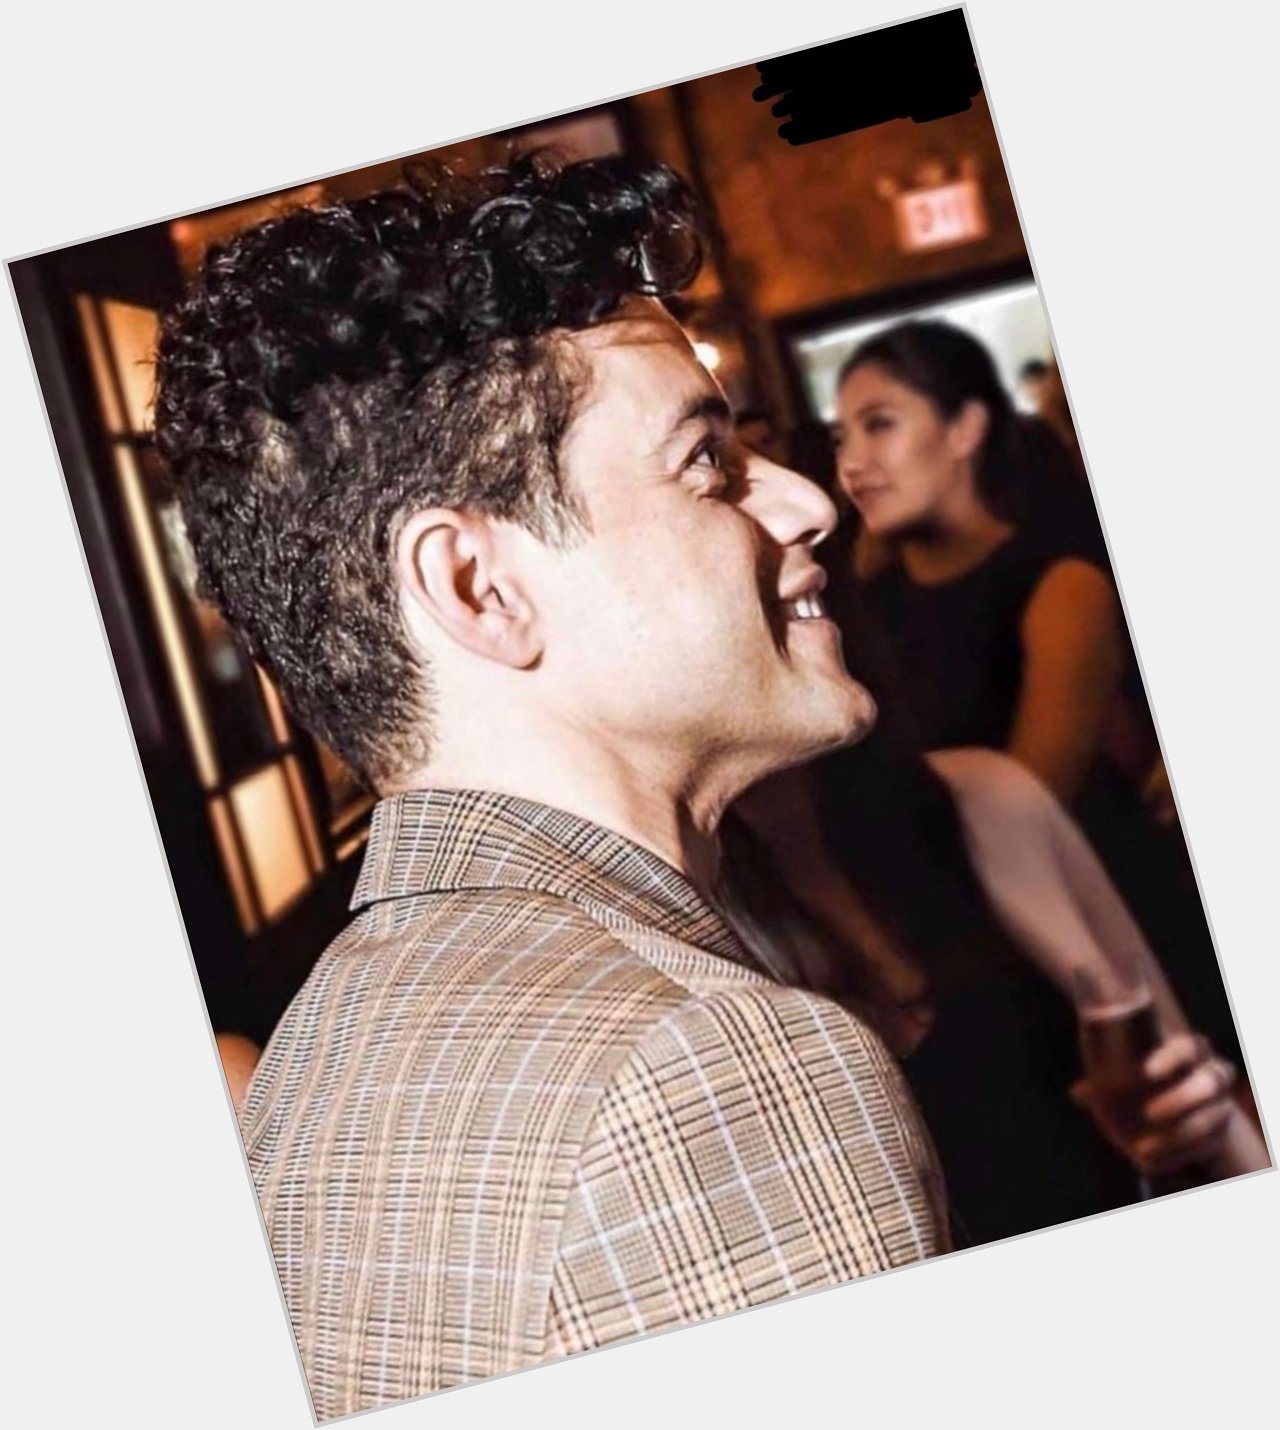 Happy birthday to this cutie  have a nice day @ rami malek, even if ya recently deleted your message account :c 